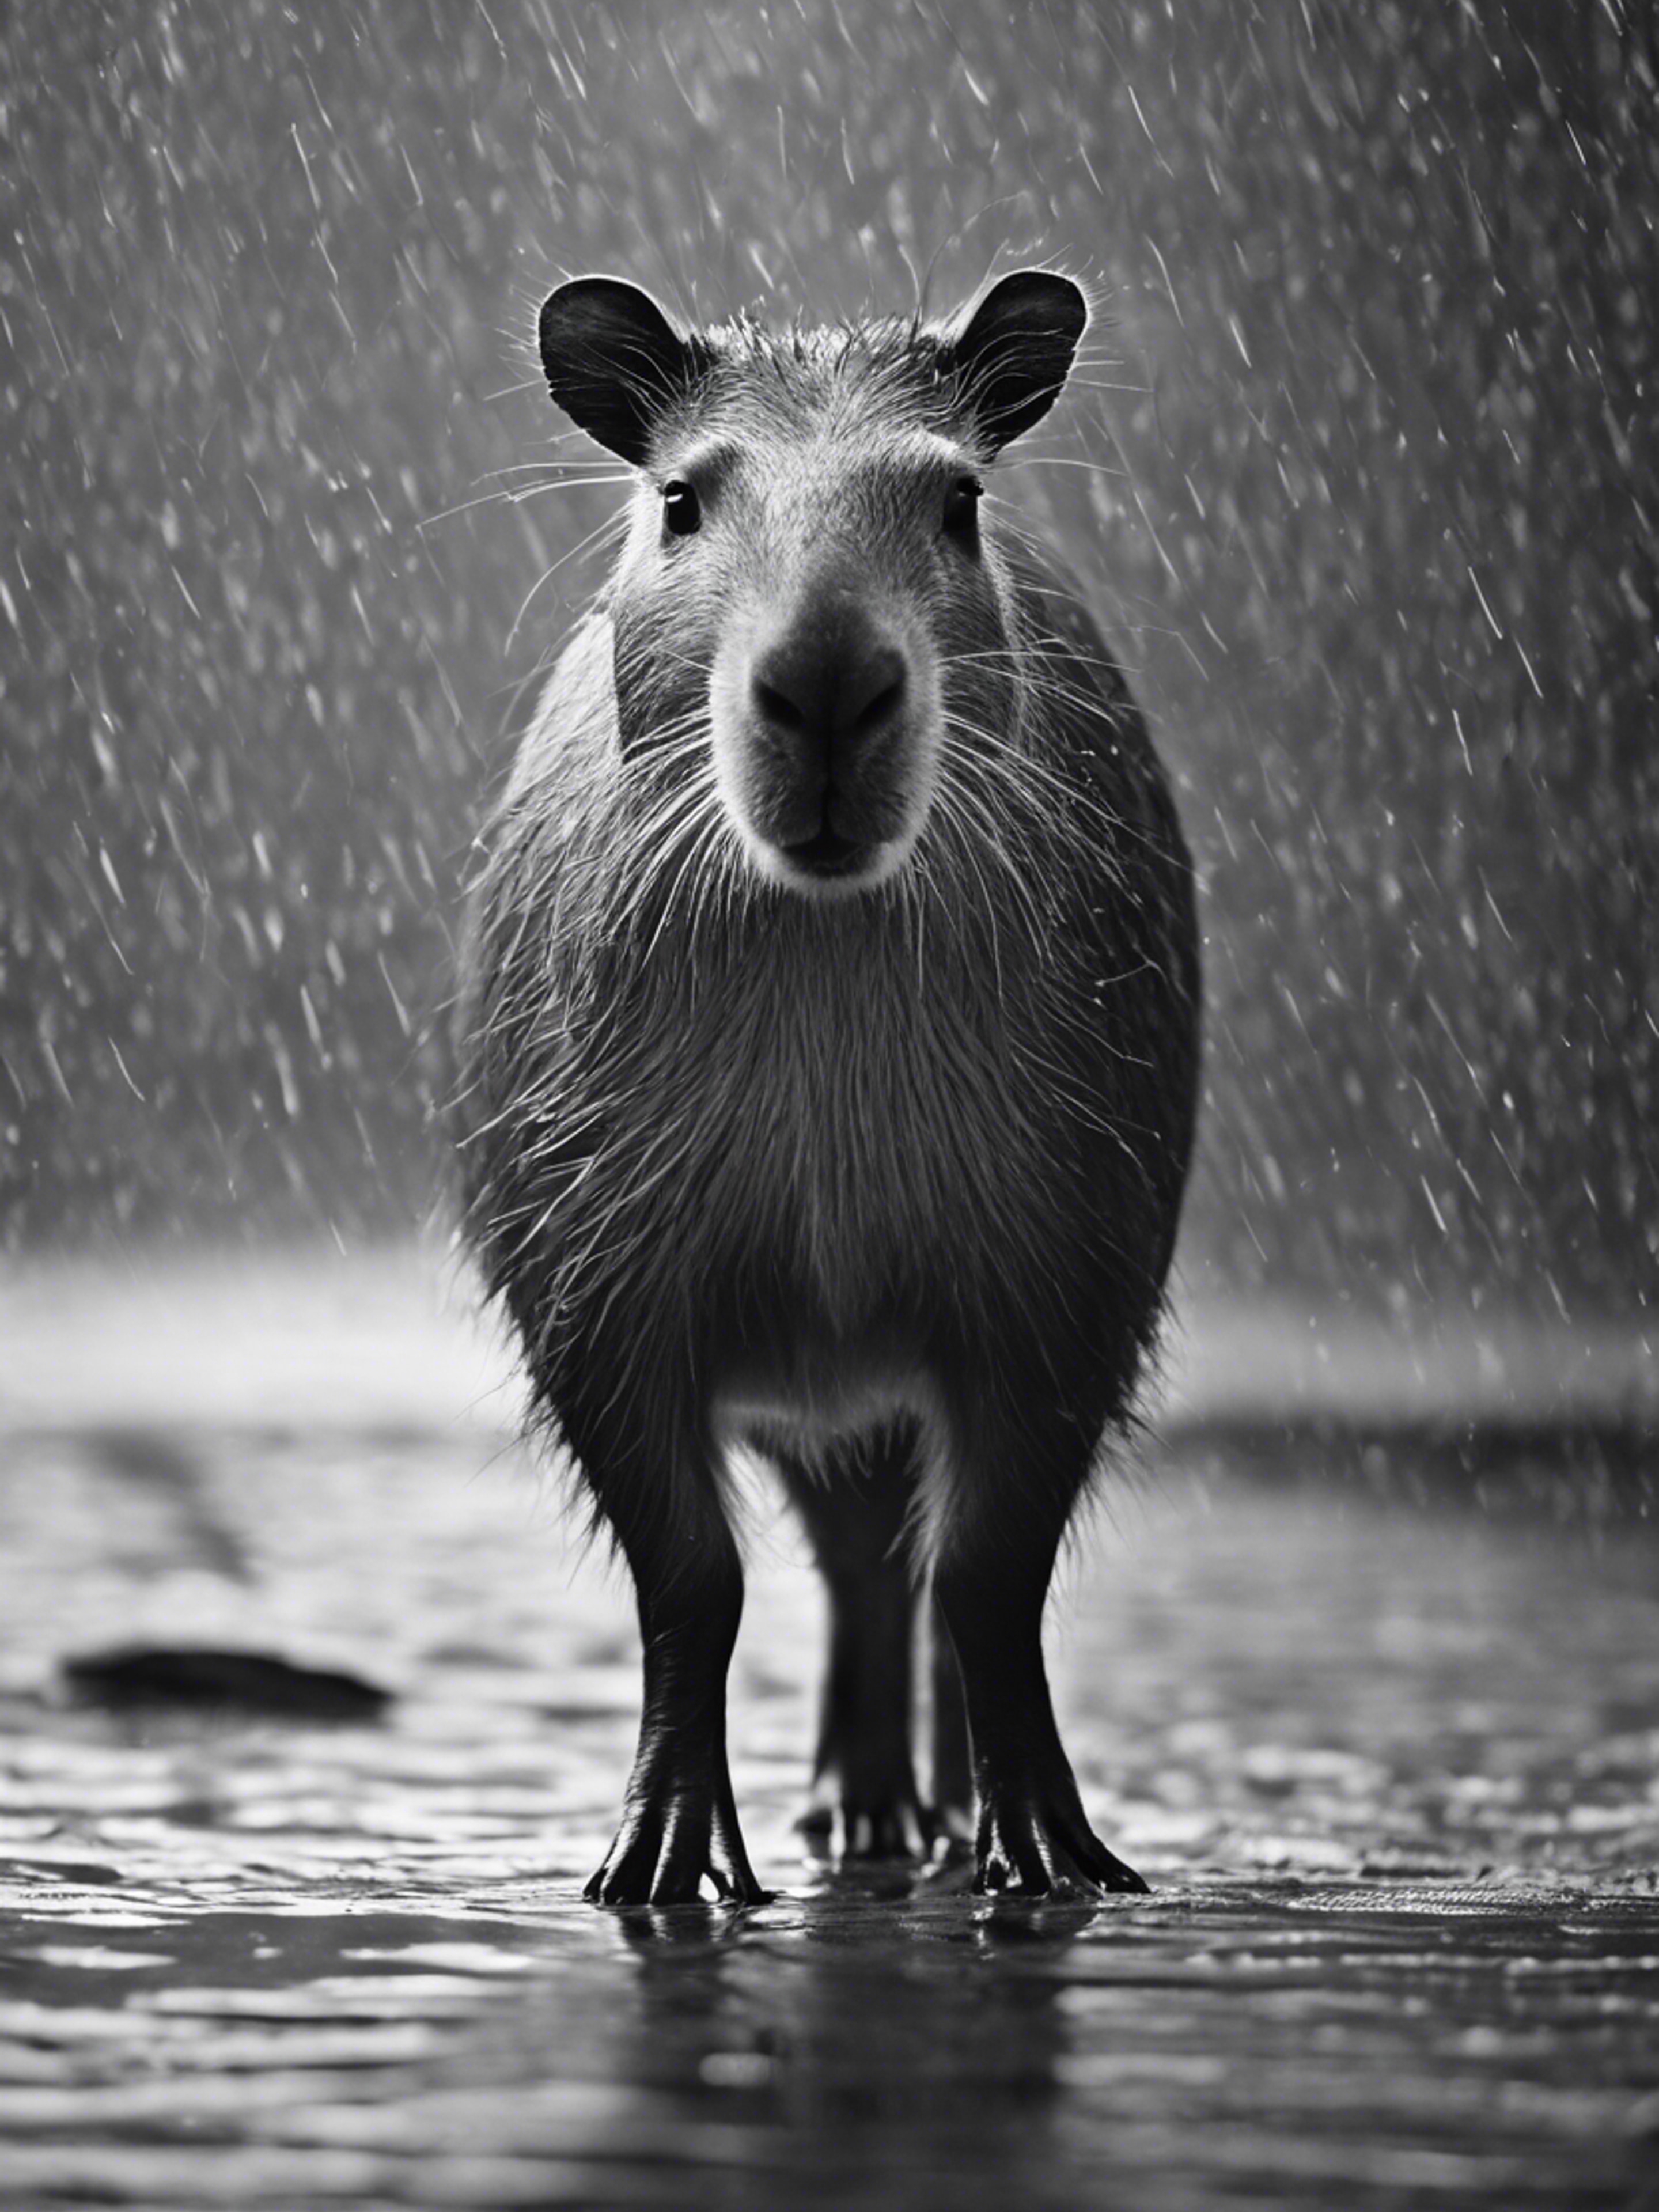 A black and white image of a capybara standing majestically in the rain.壁紙[afcf008538a64ed48f93]